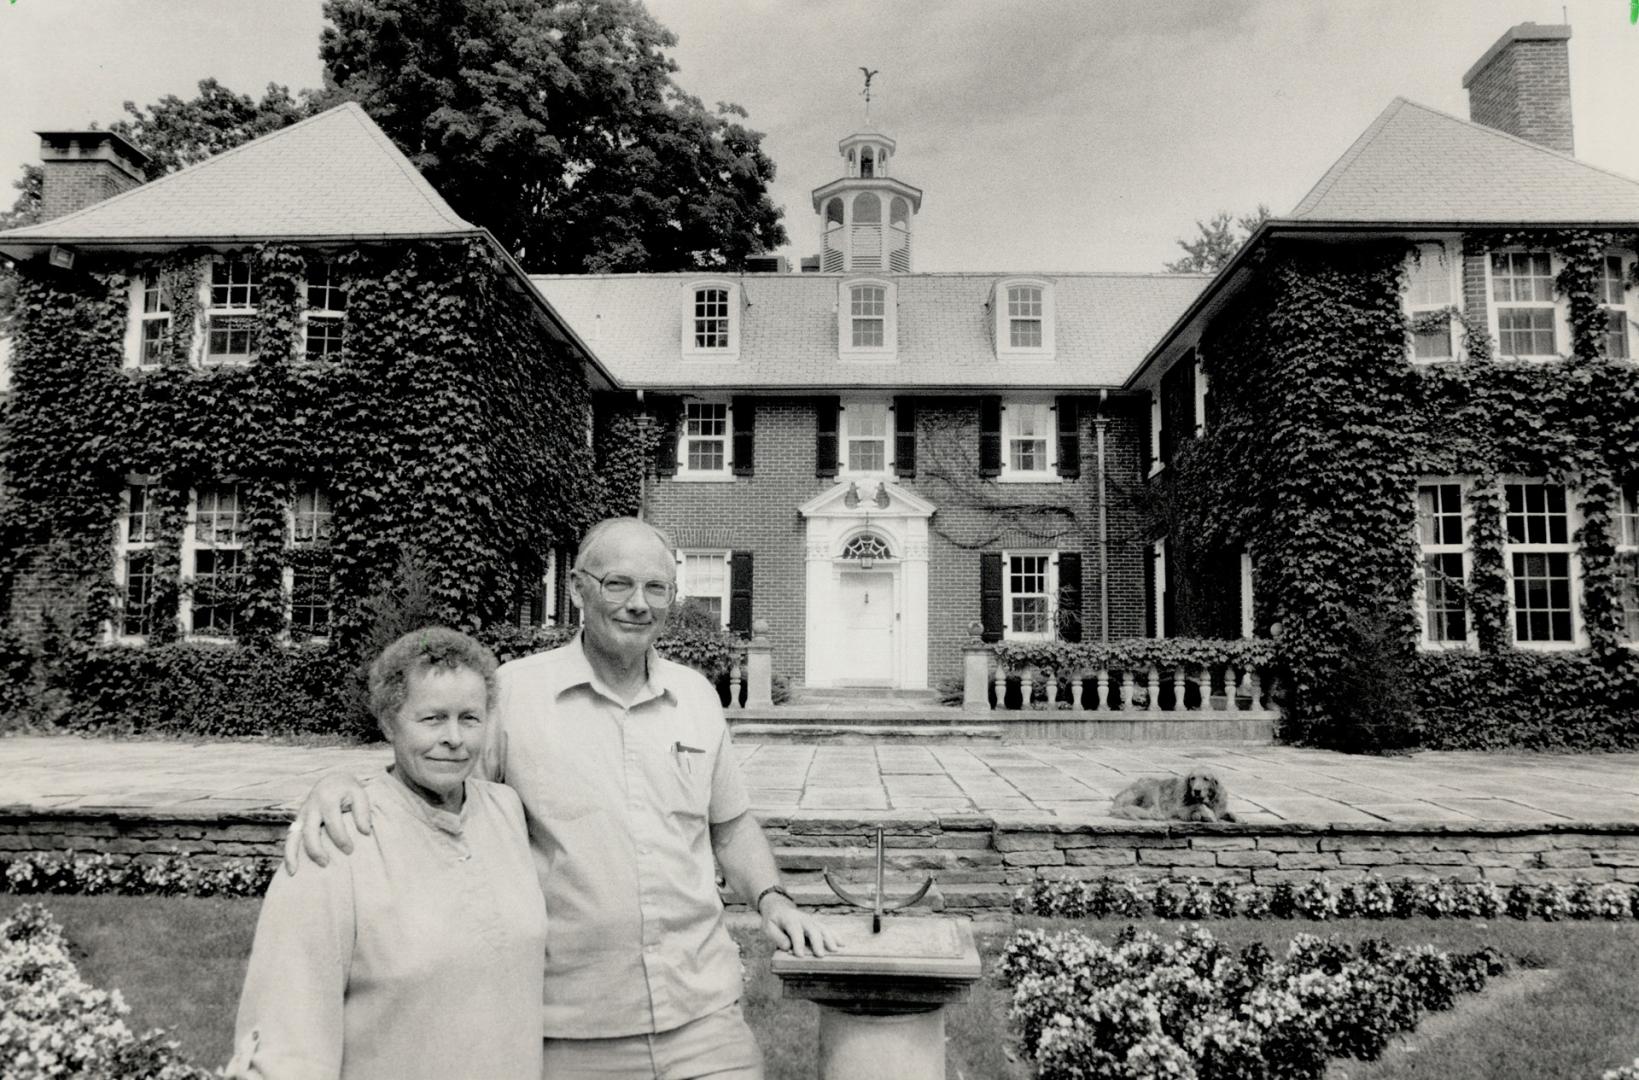 End of a dream: David and Nancy Hadden, owners of Batterwood, the former estate of governor-general Vincent Massey, had planned to build a guesthouse to accommodate fellow members of the Baha'l faith